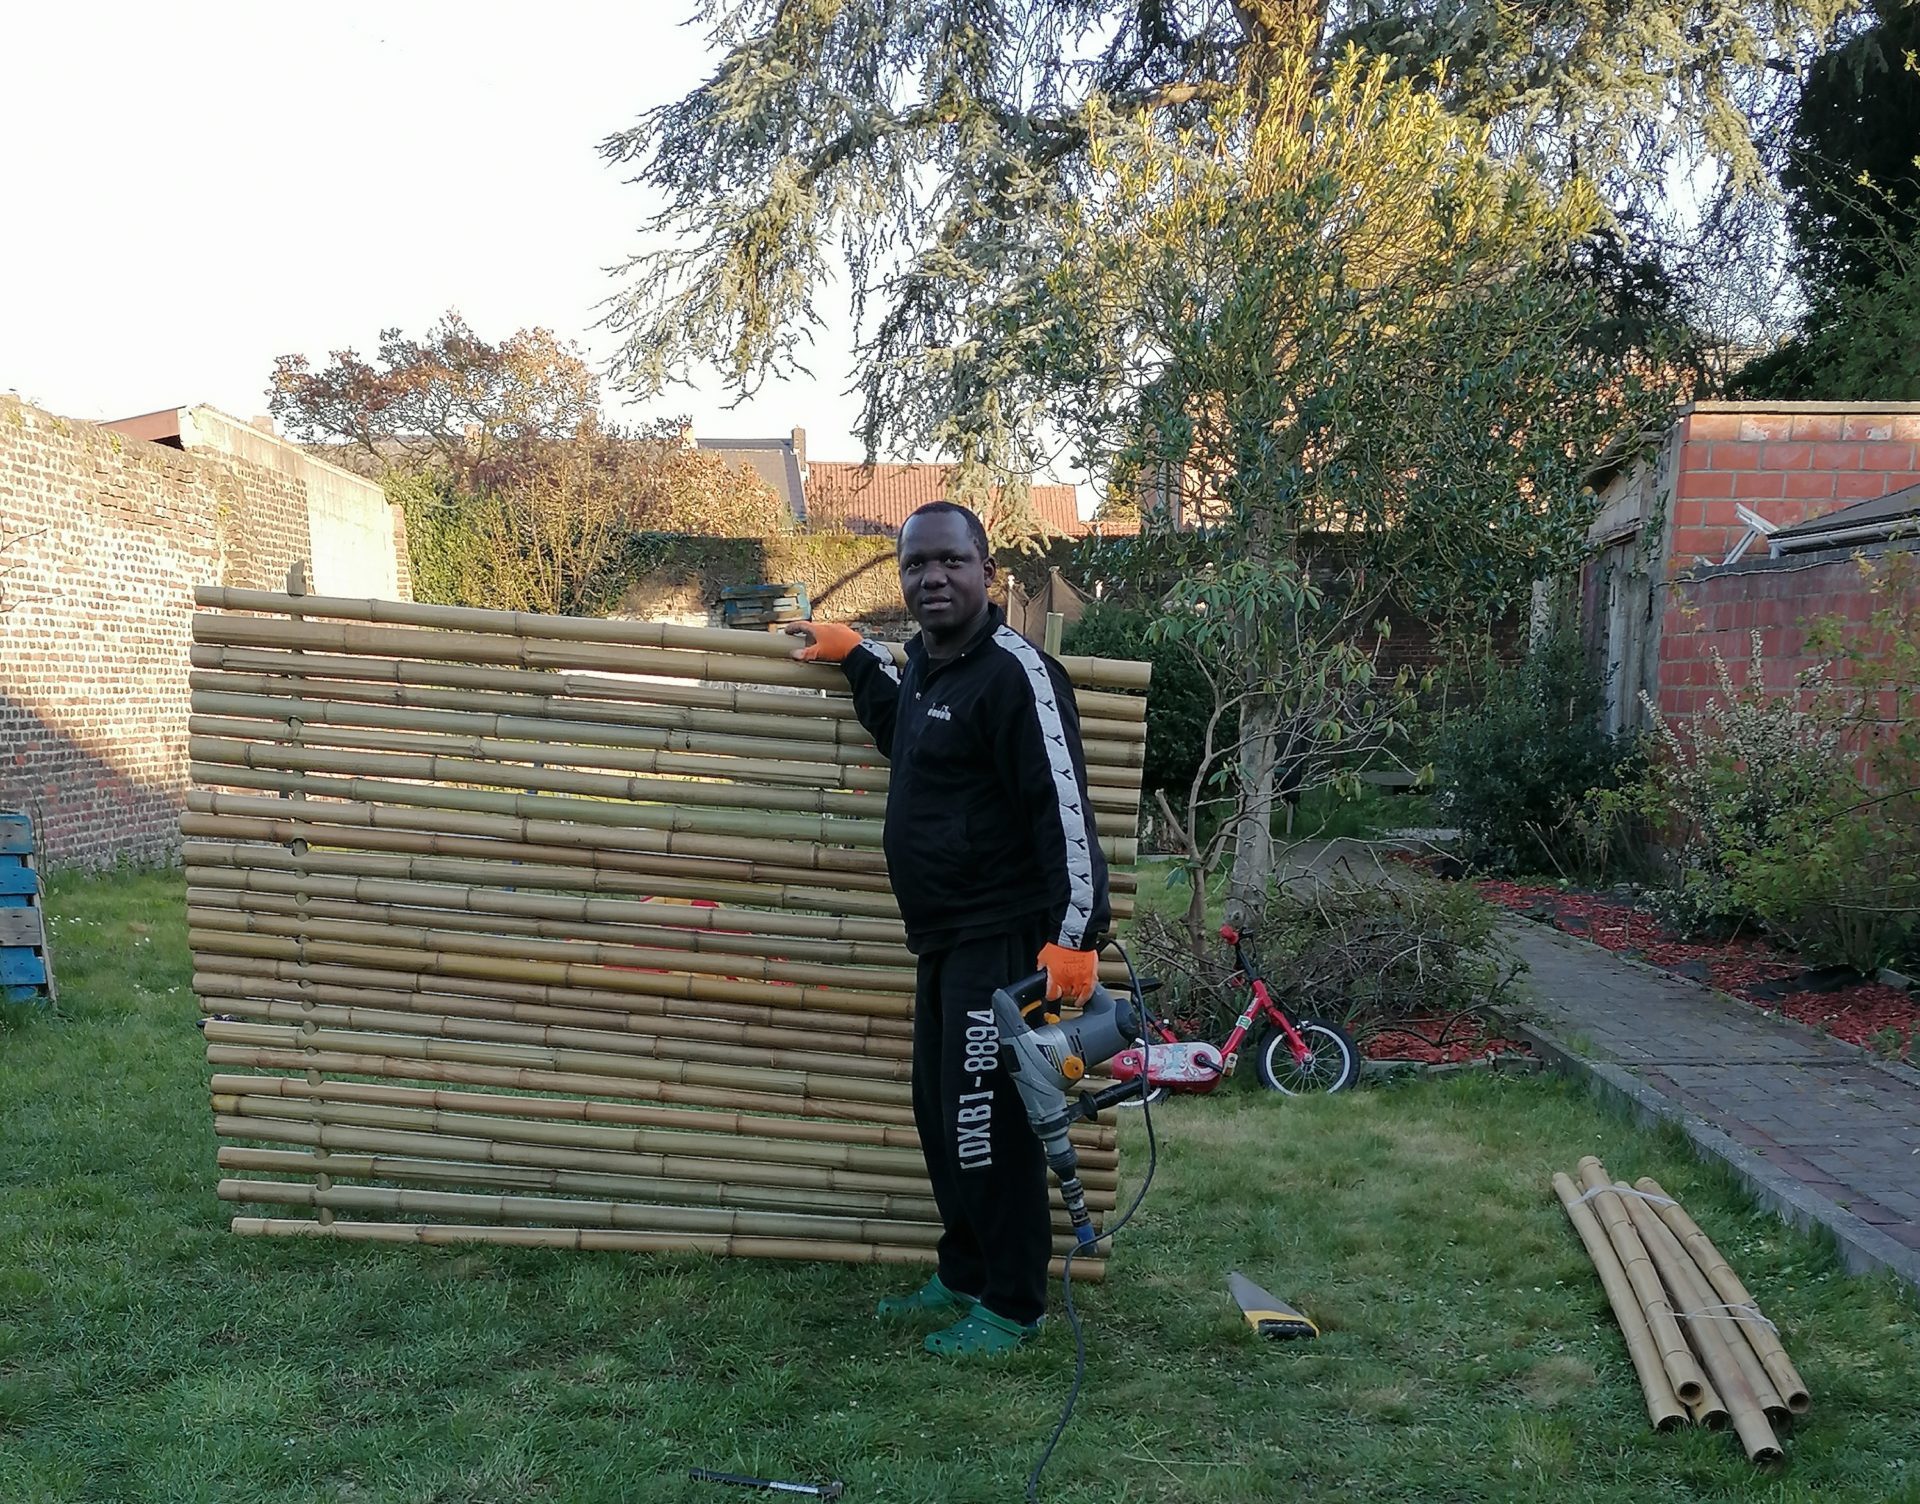 Bamboo fencing -  France